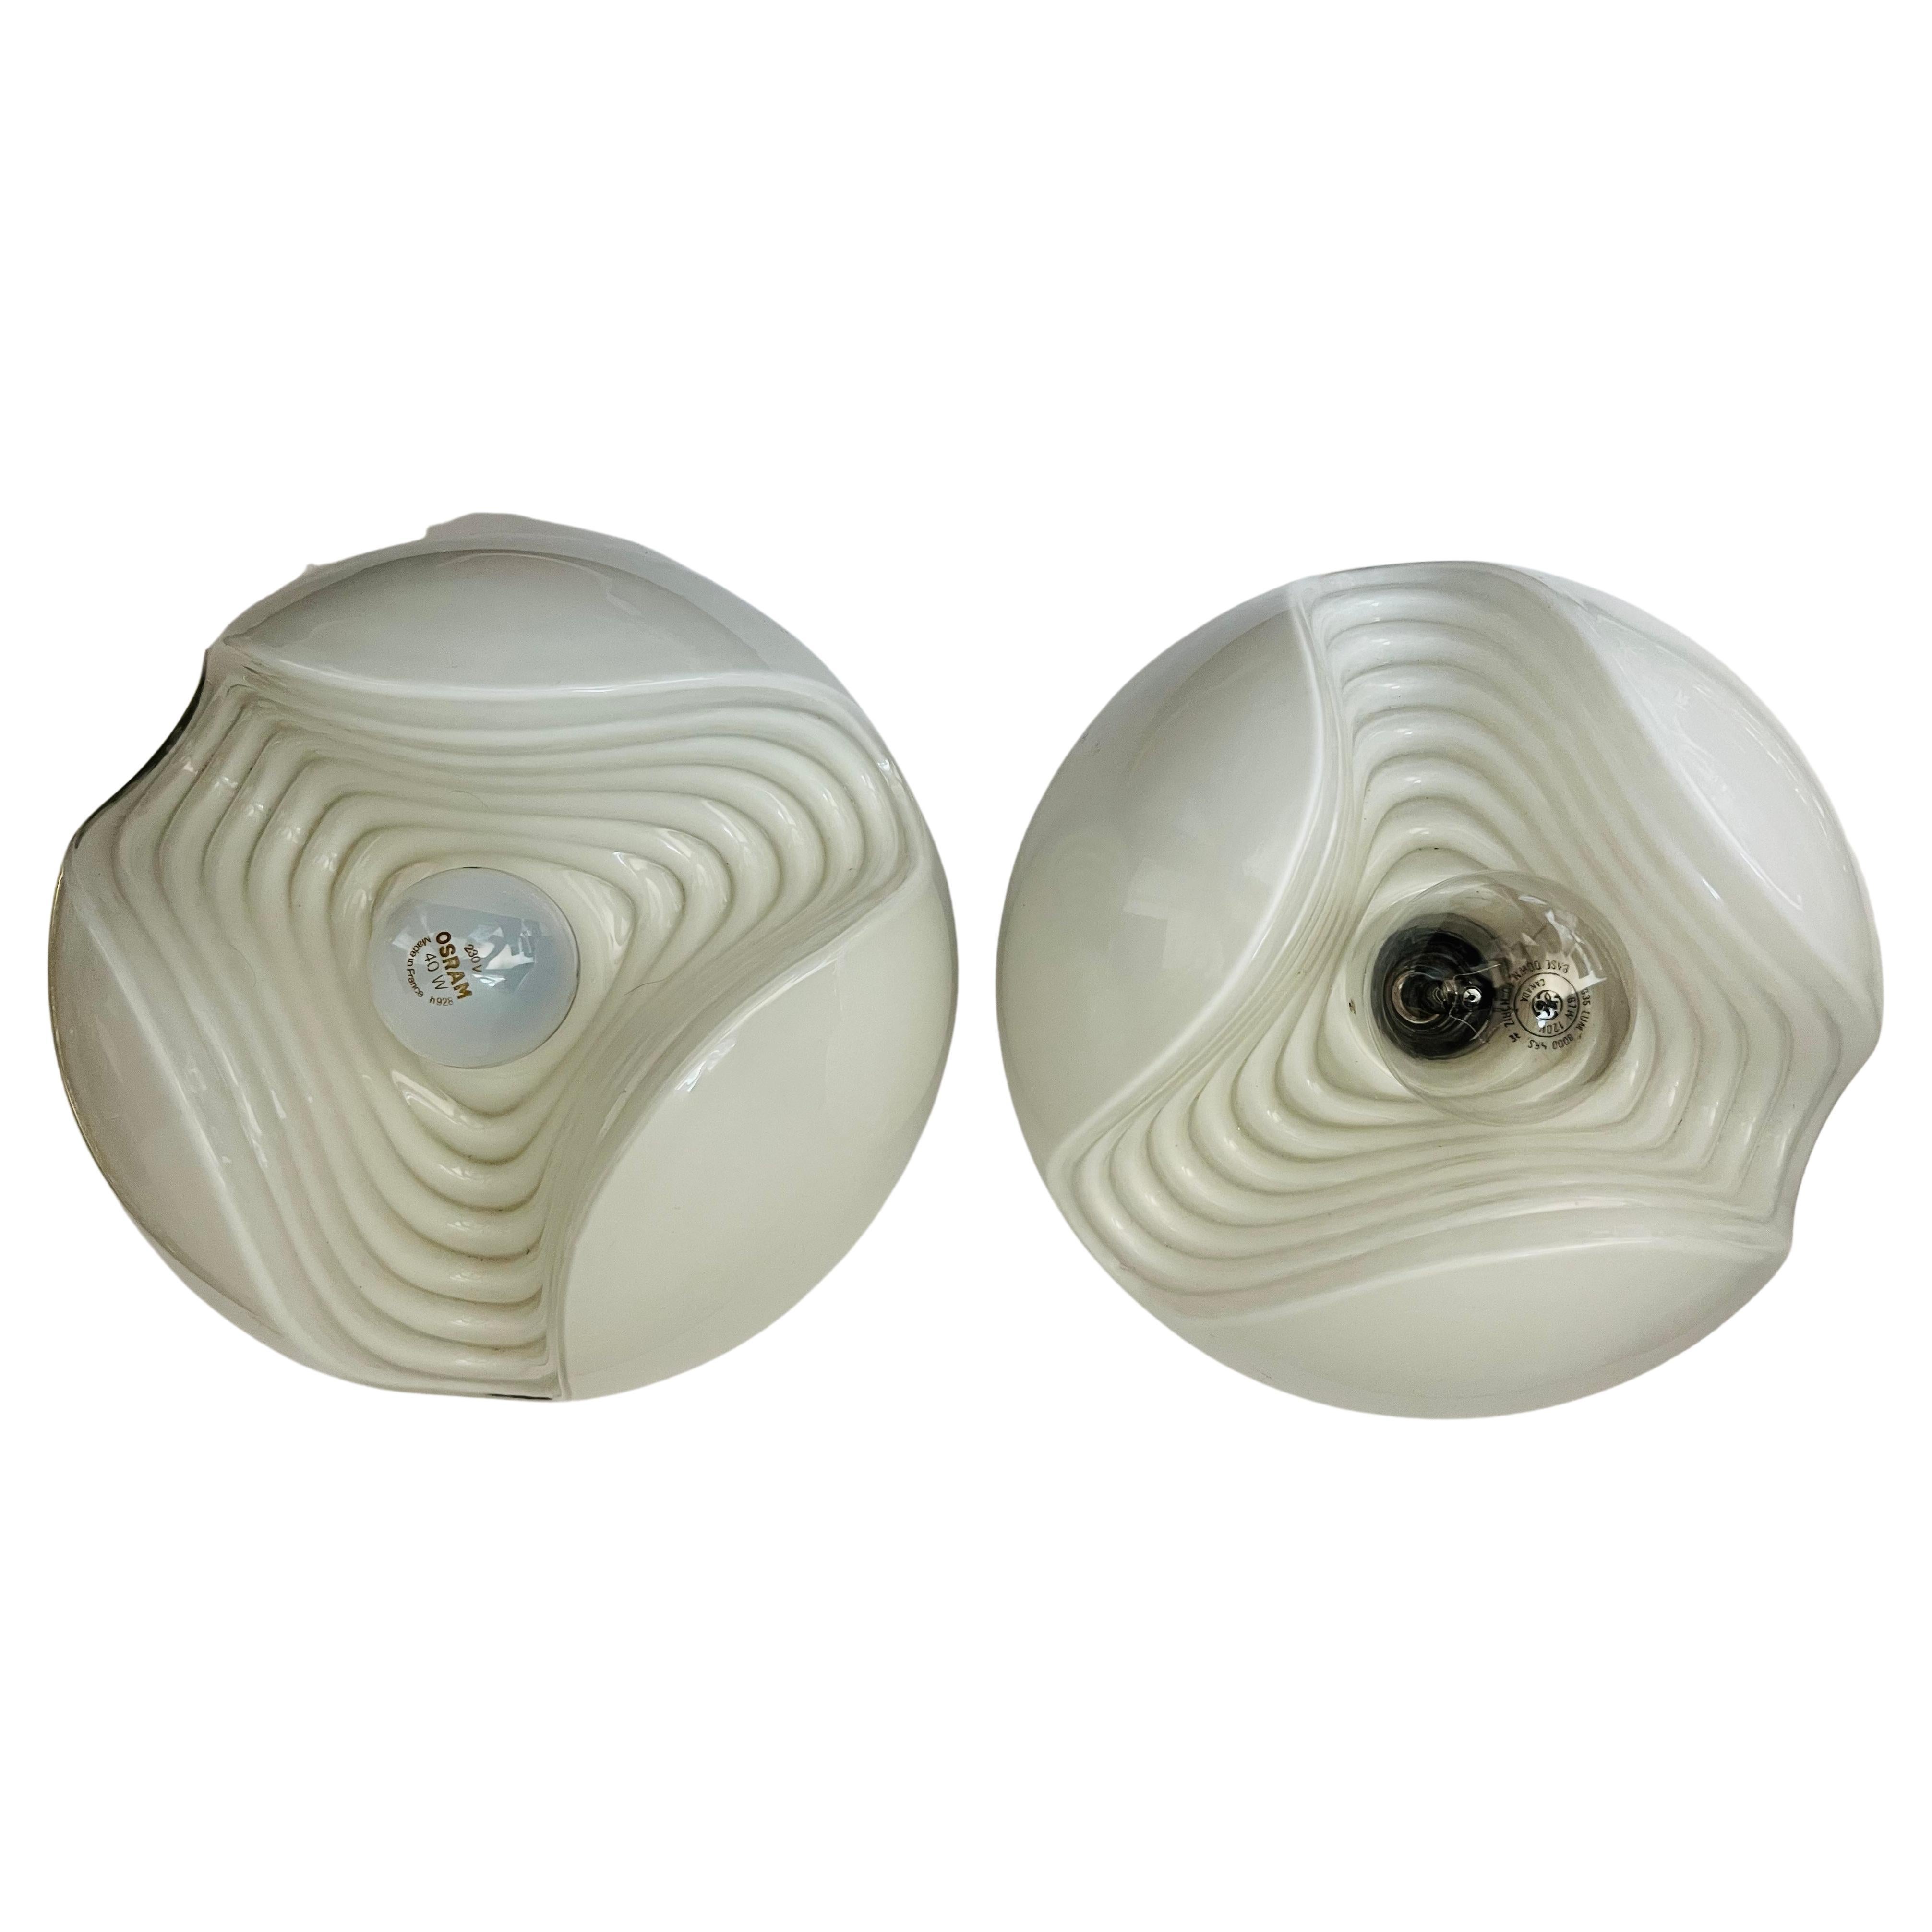 Pair of Wall Ceiling Lamps German Peil Putzler Wave 1970s Space Age